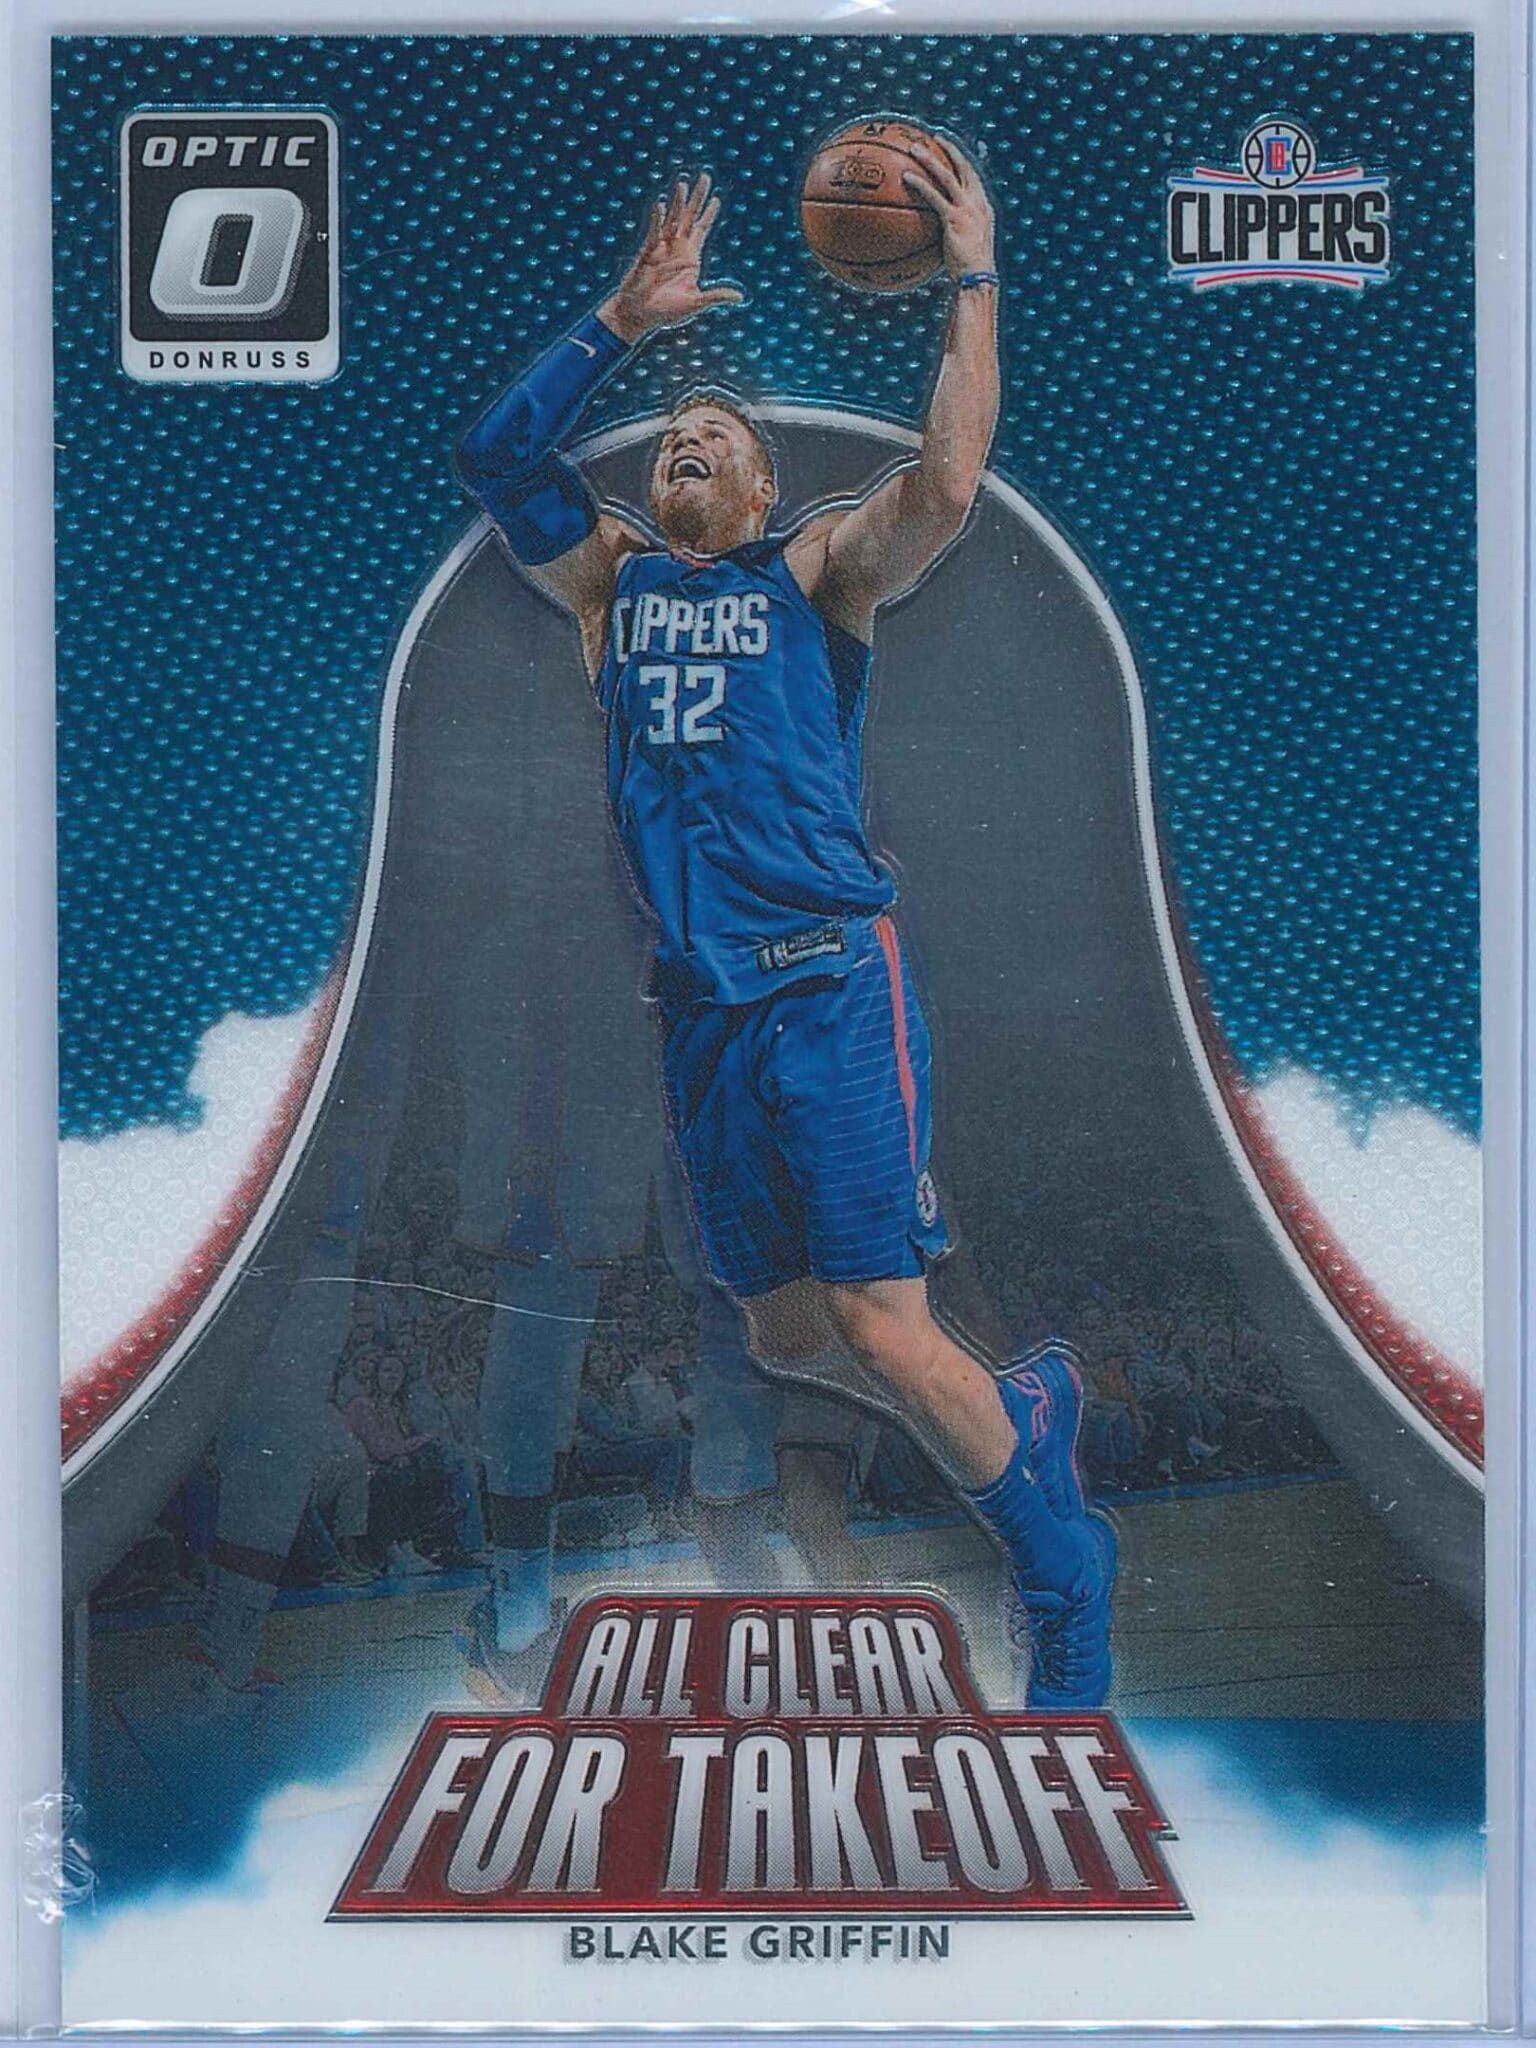 Blake Griffin Panini Donruss Optic Basketball  2017-18 All Clear For Takeoff